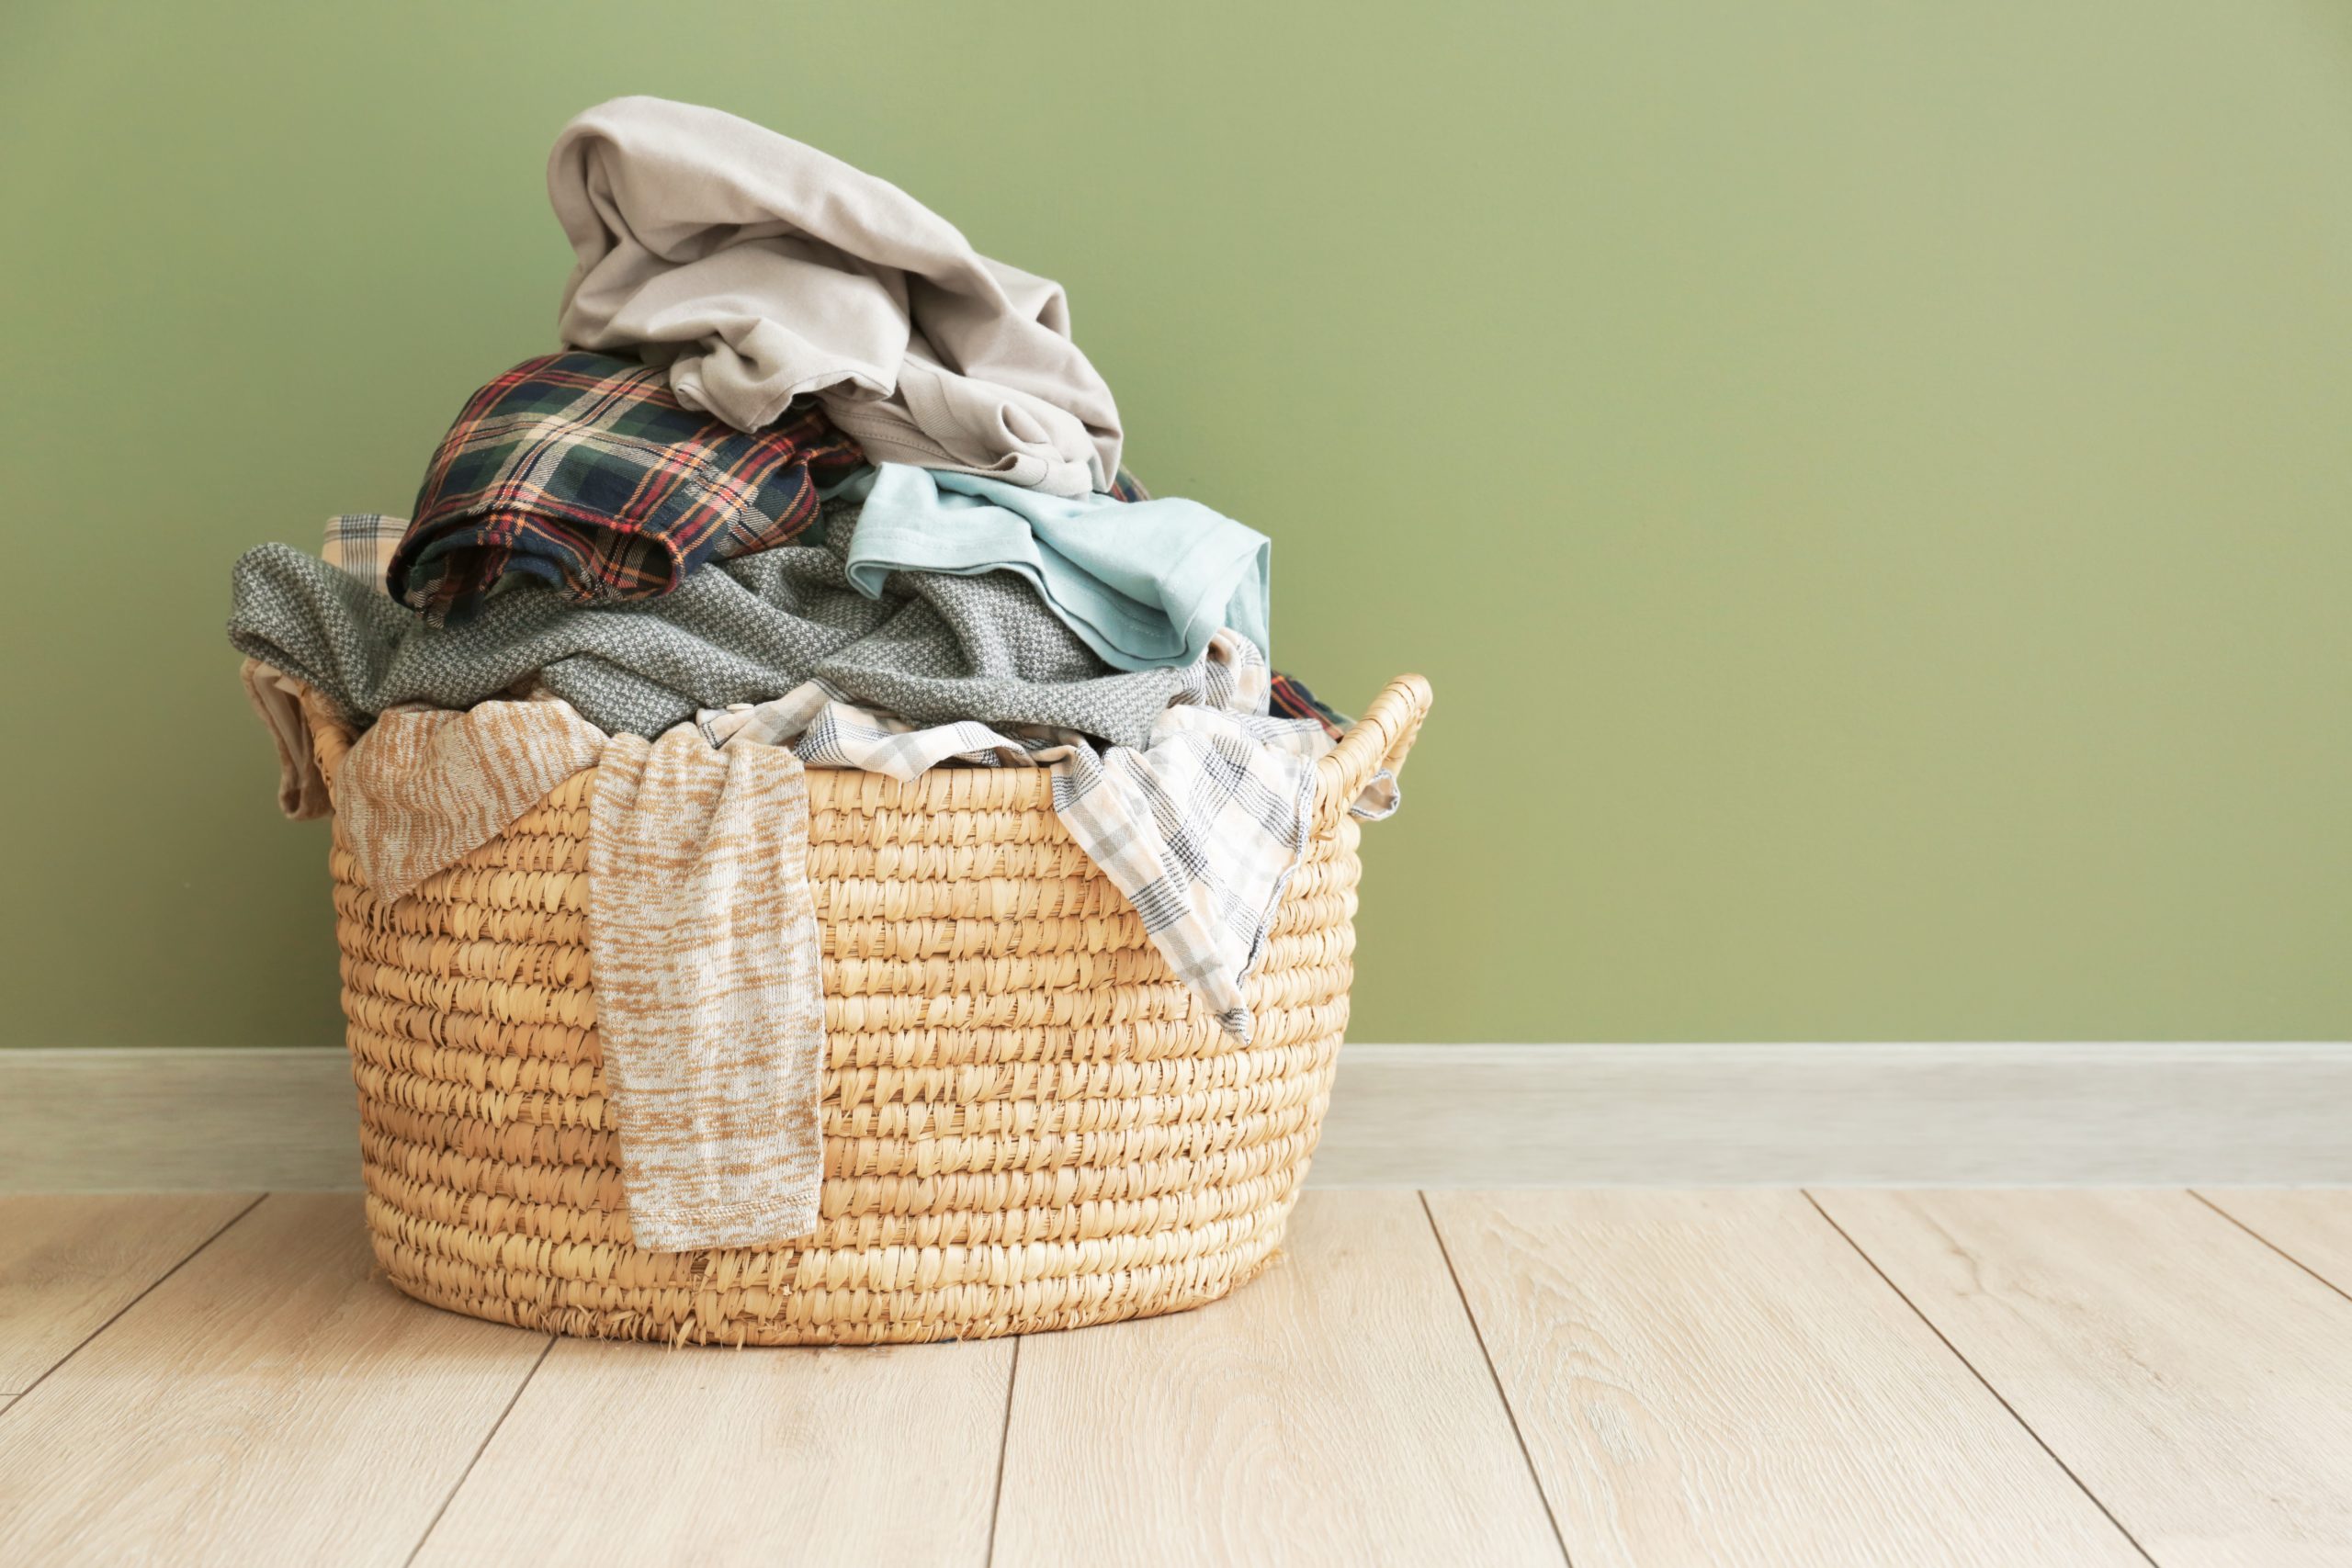 Modern Laundry Redefines Laundry Service Standards in Windsor, CT